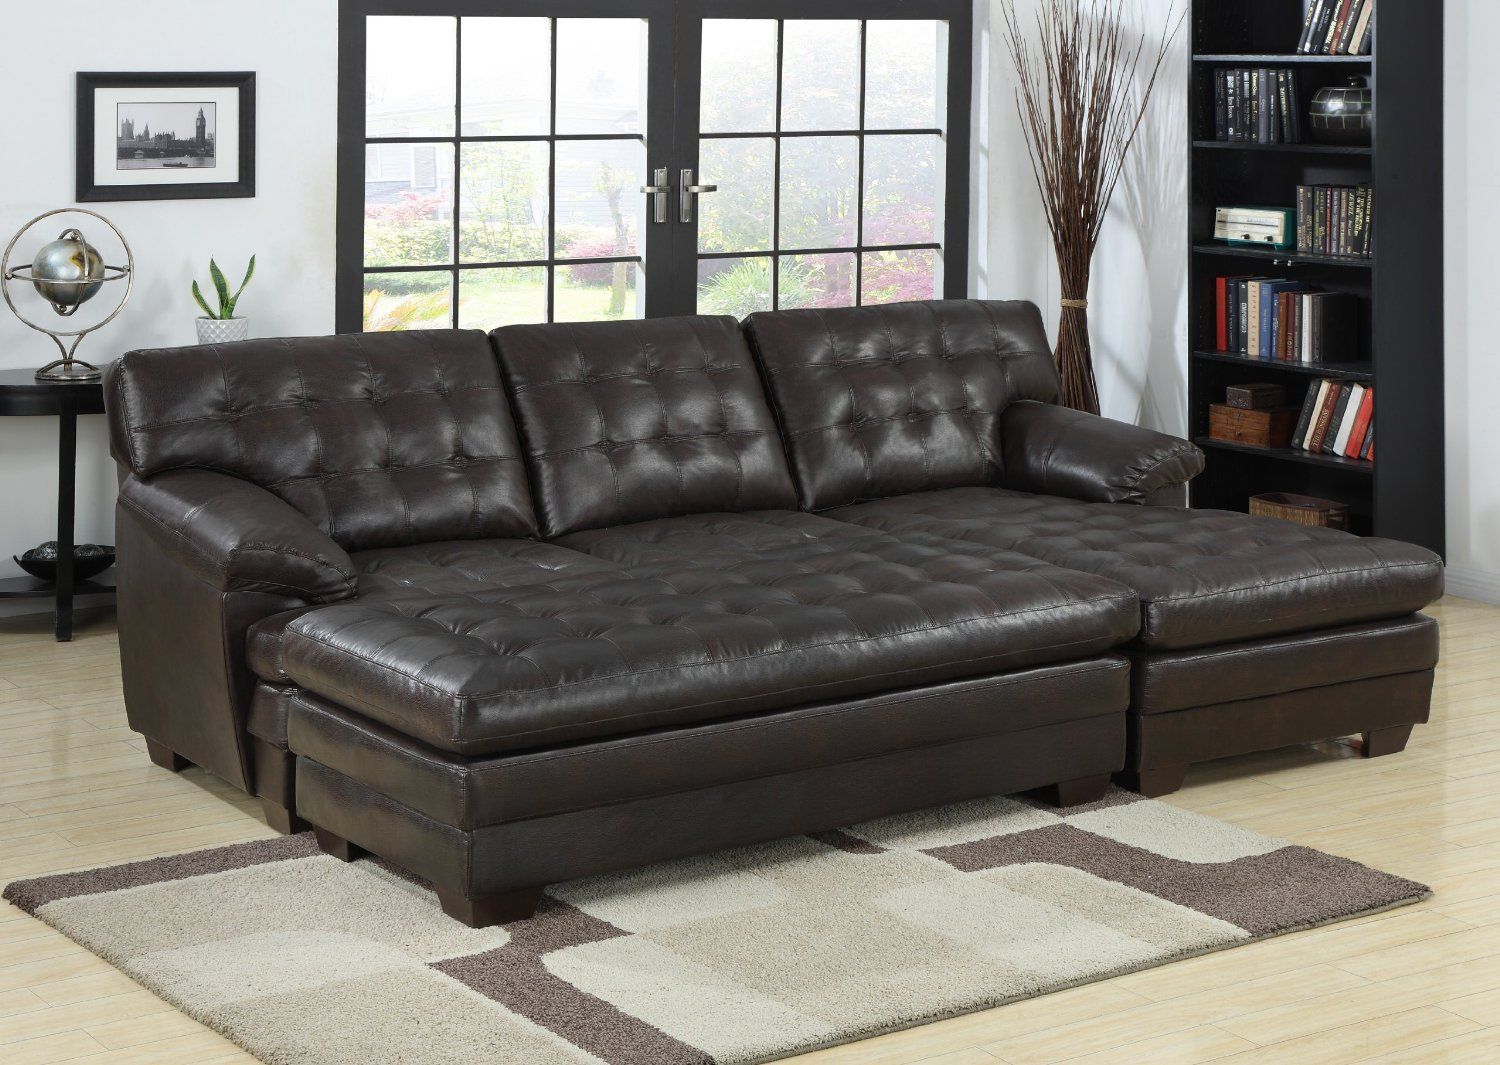 2 Piece Sectional Sofa With Chaise Design – Homesfeed Intended For Copenhagen Reclining Sectional Sofas With Right Storage Chaise (View 12 of 15)